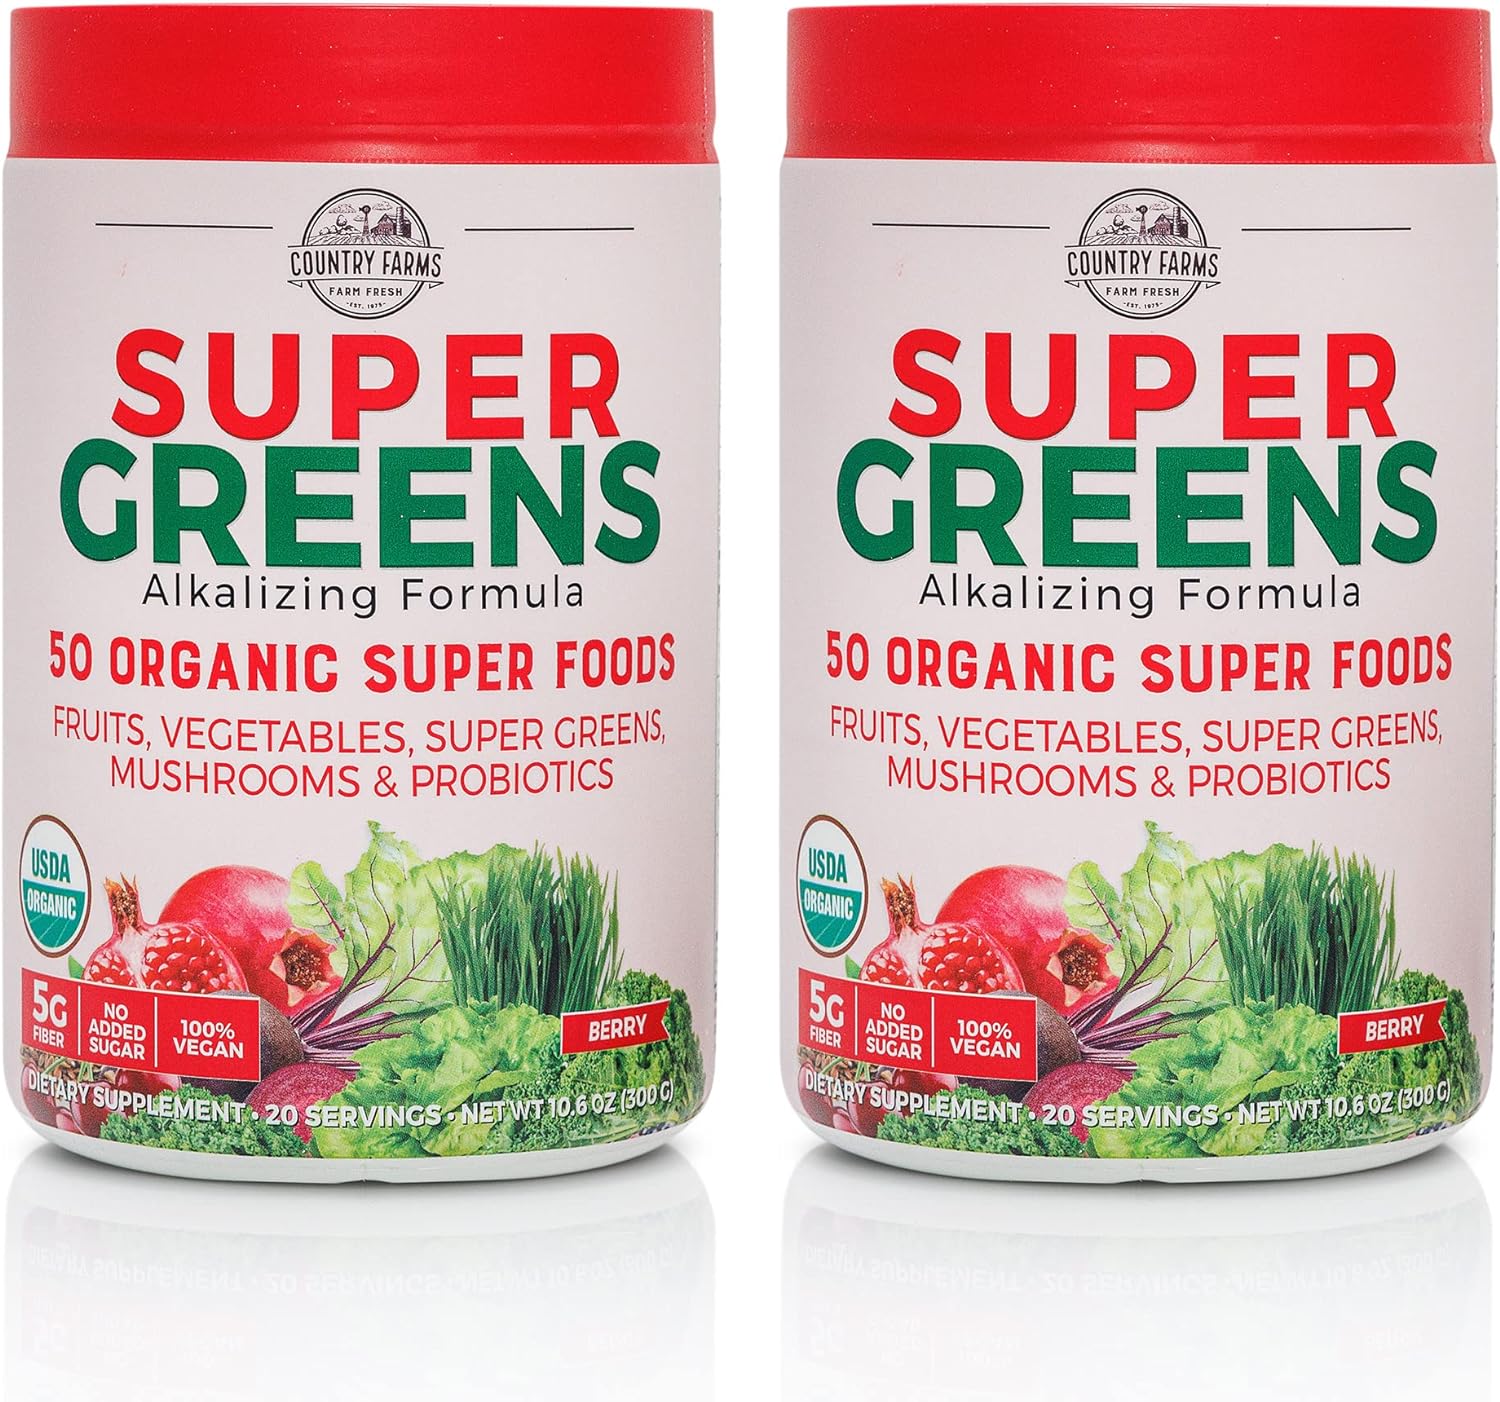 COUNTRY FARMS Super Greens Berry Flavor, 50 Organic Foods, USDA Drink Mix, Multicolor, Multi, 40 Servings, 21 Oz, 2 Pack